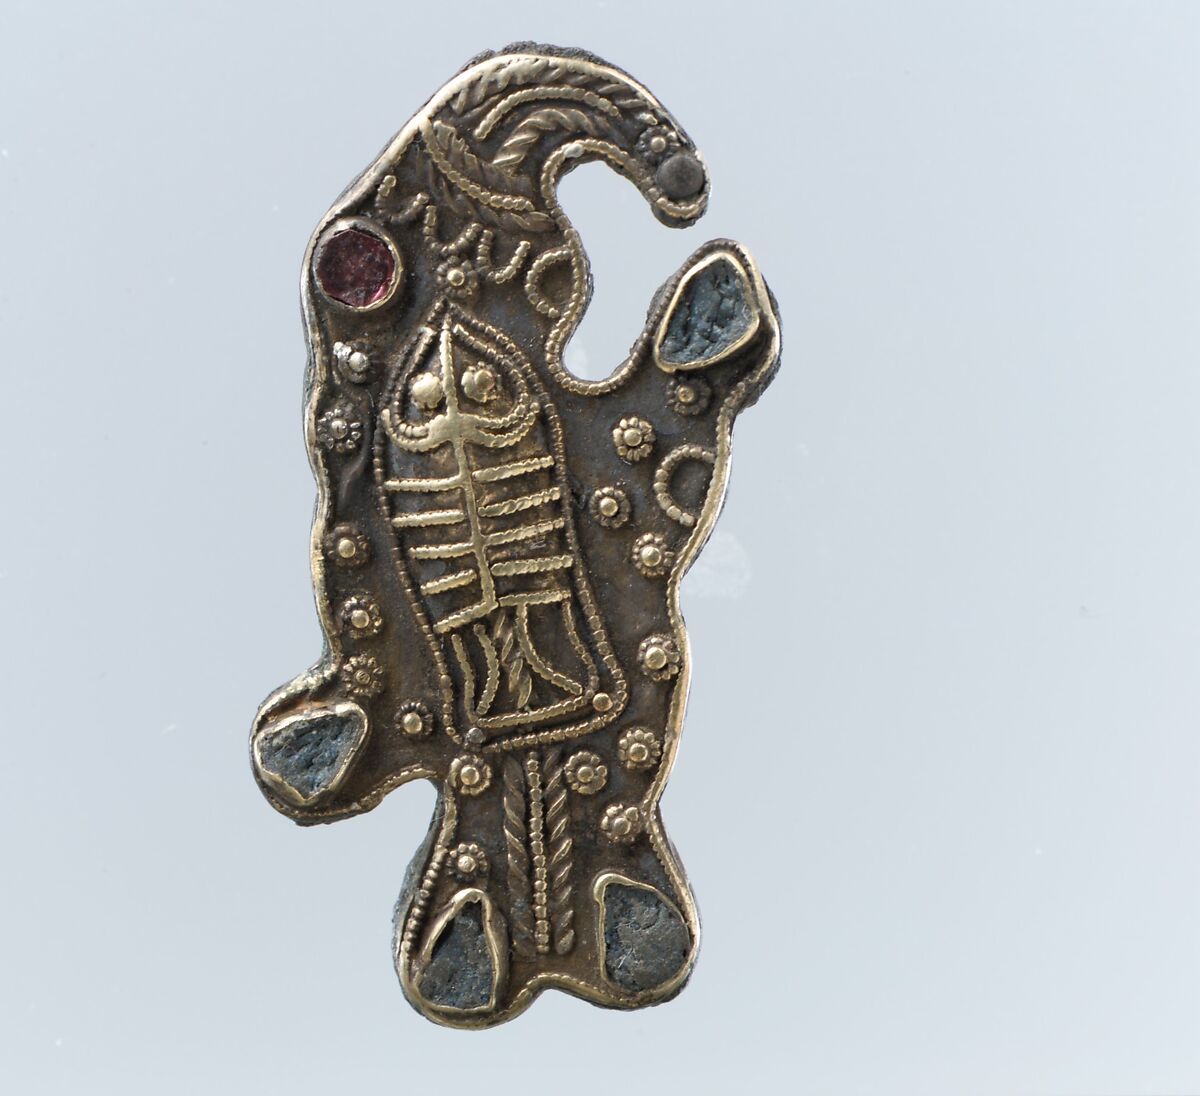 Bird-Shaped Brooch, Gold sheet with filigree and granulation and inlays of garnet and glass, Frankish 